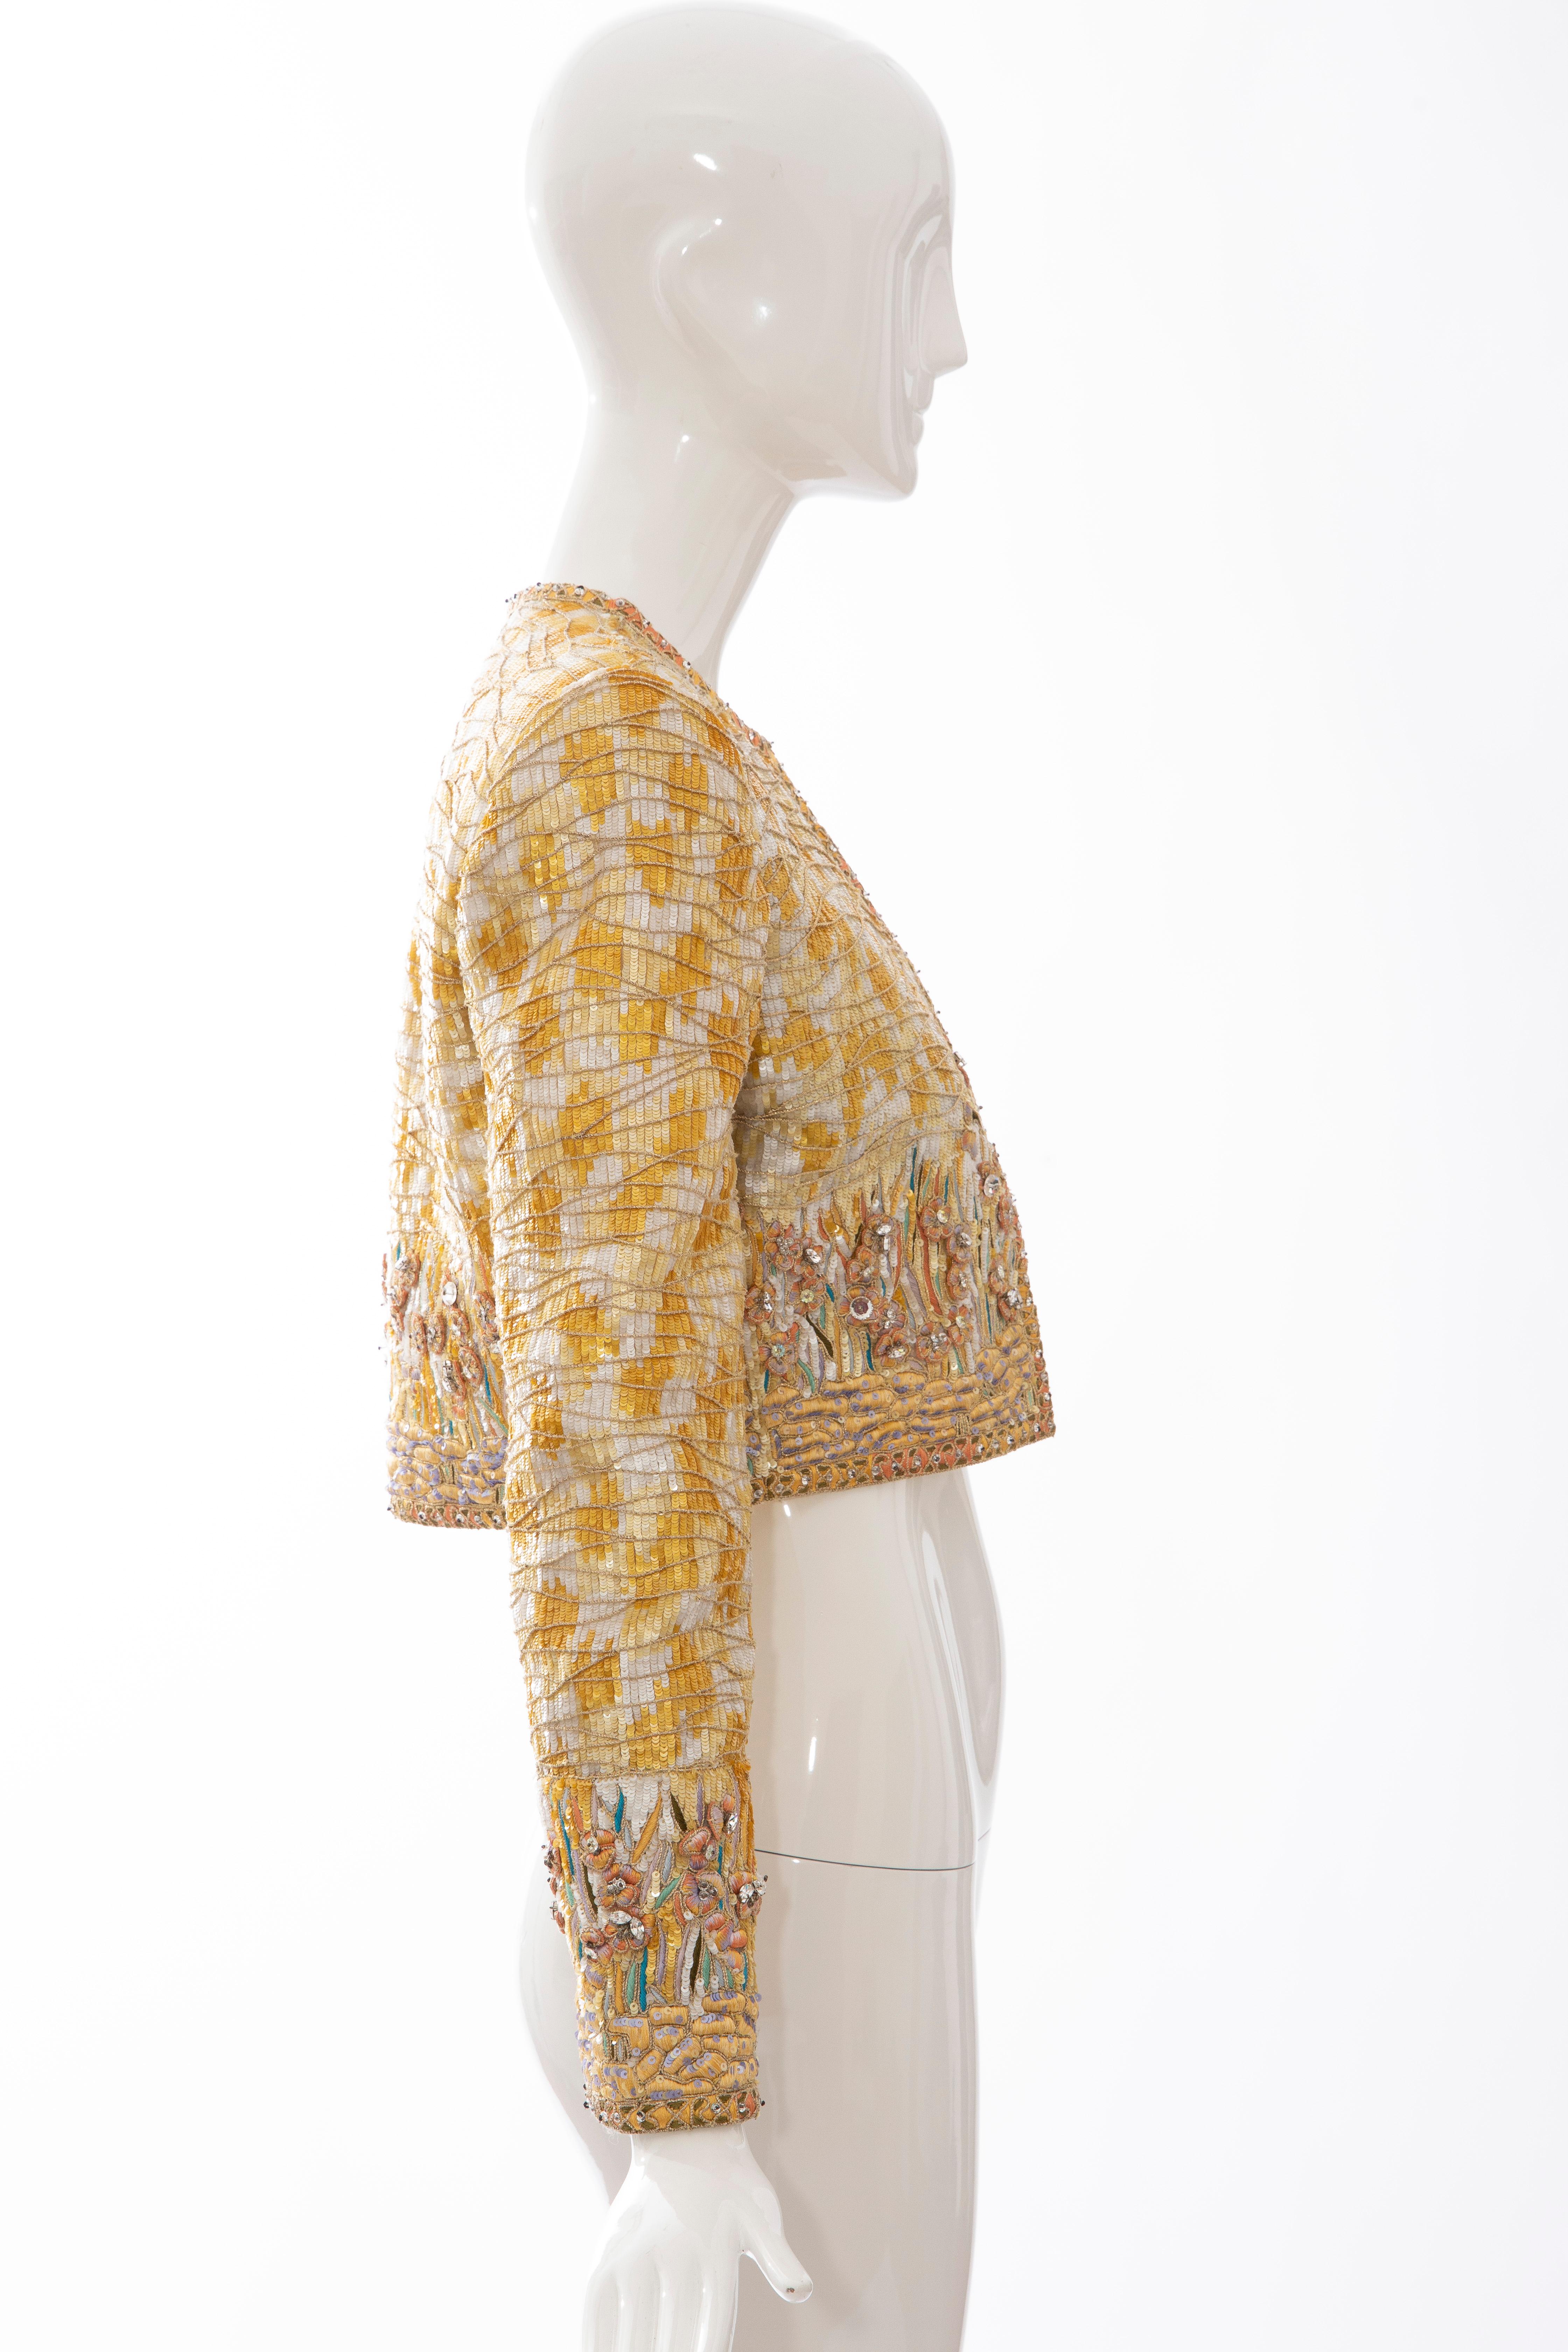 Mary McFadden Couture Silk Embroidered Sequins Diamanté Bolero Jacket, ca. 1980's In Good Condition For Sale In Cincinnati, OH